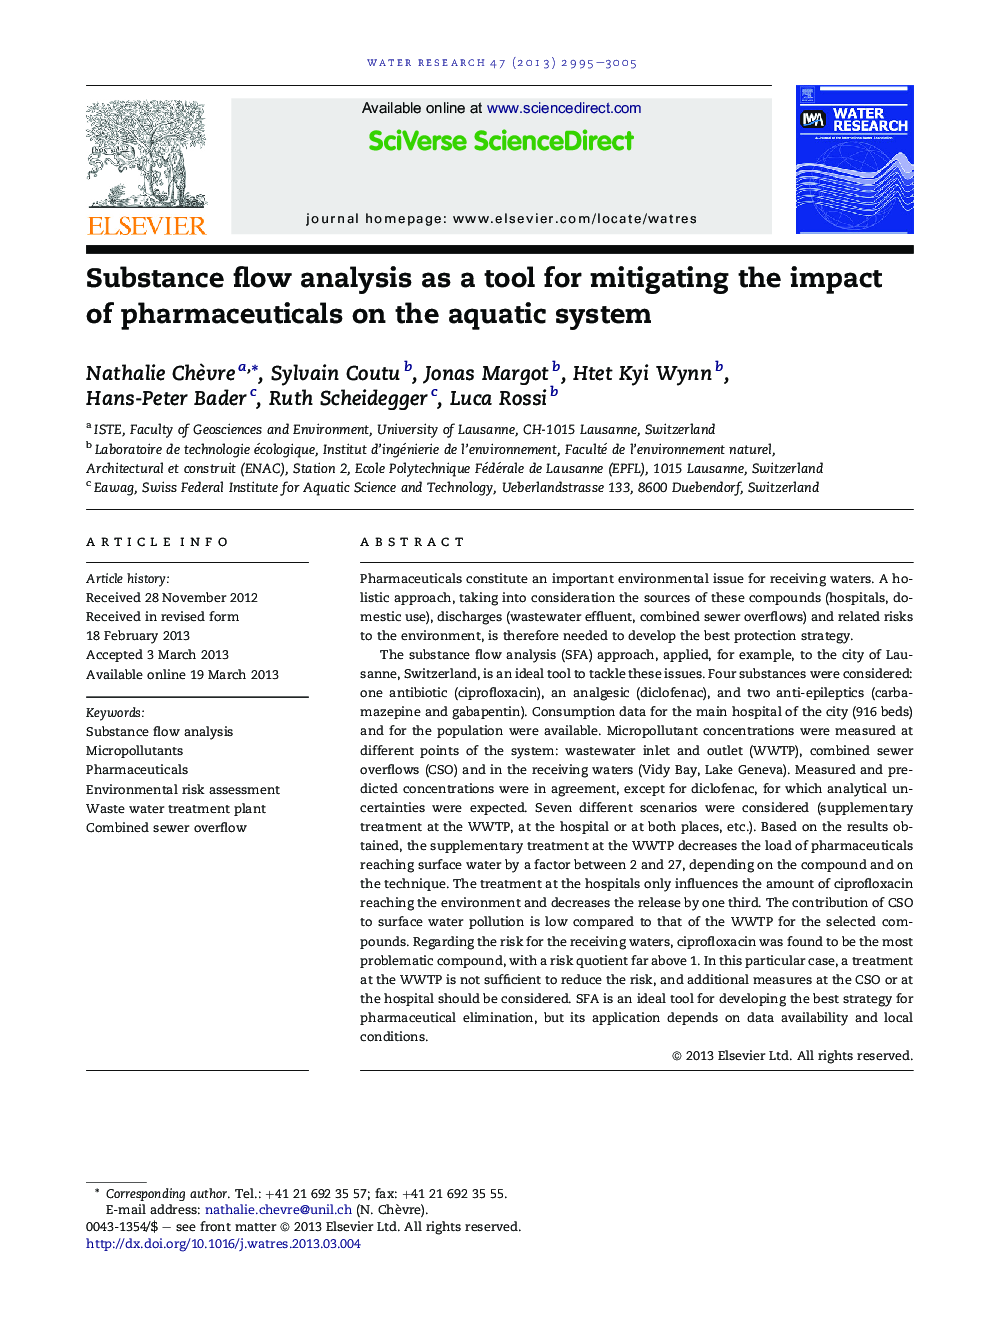 Substance flow analysis as a tool for mitigating the impact of pharmaceuticals on the aquatic system